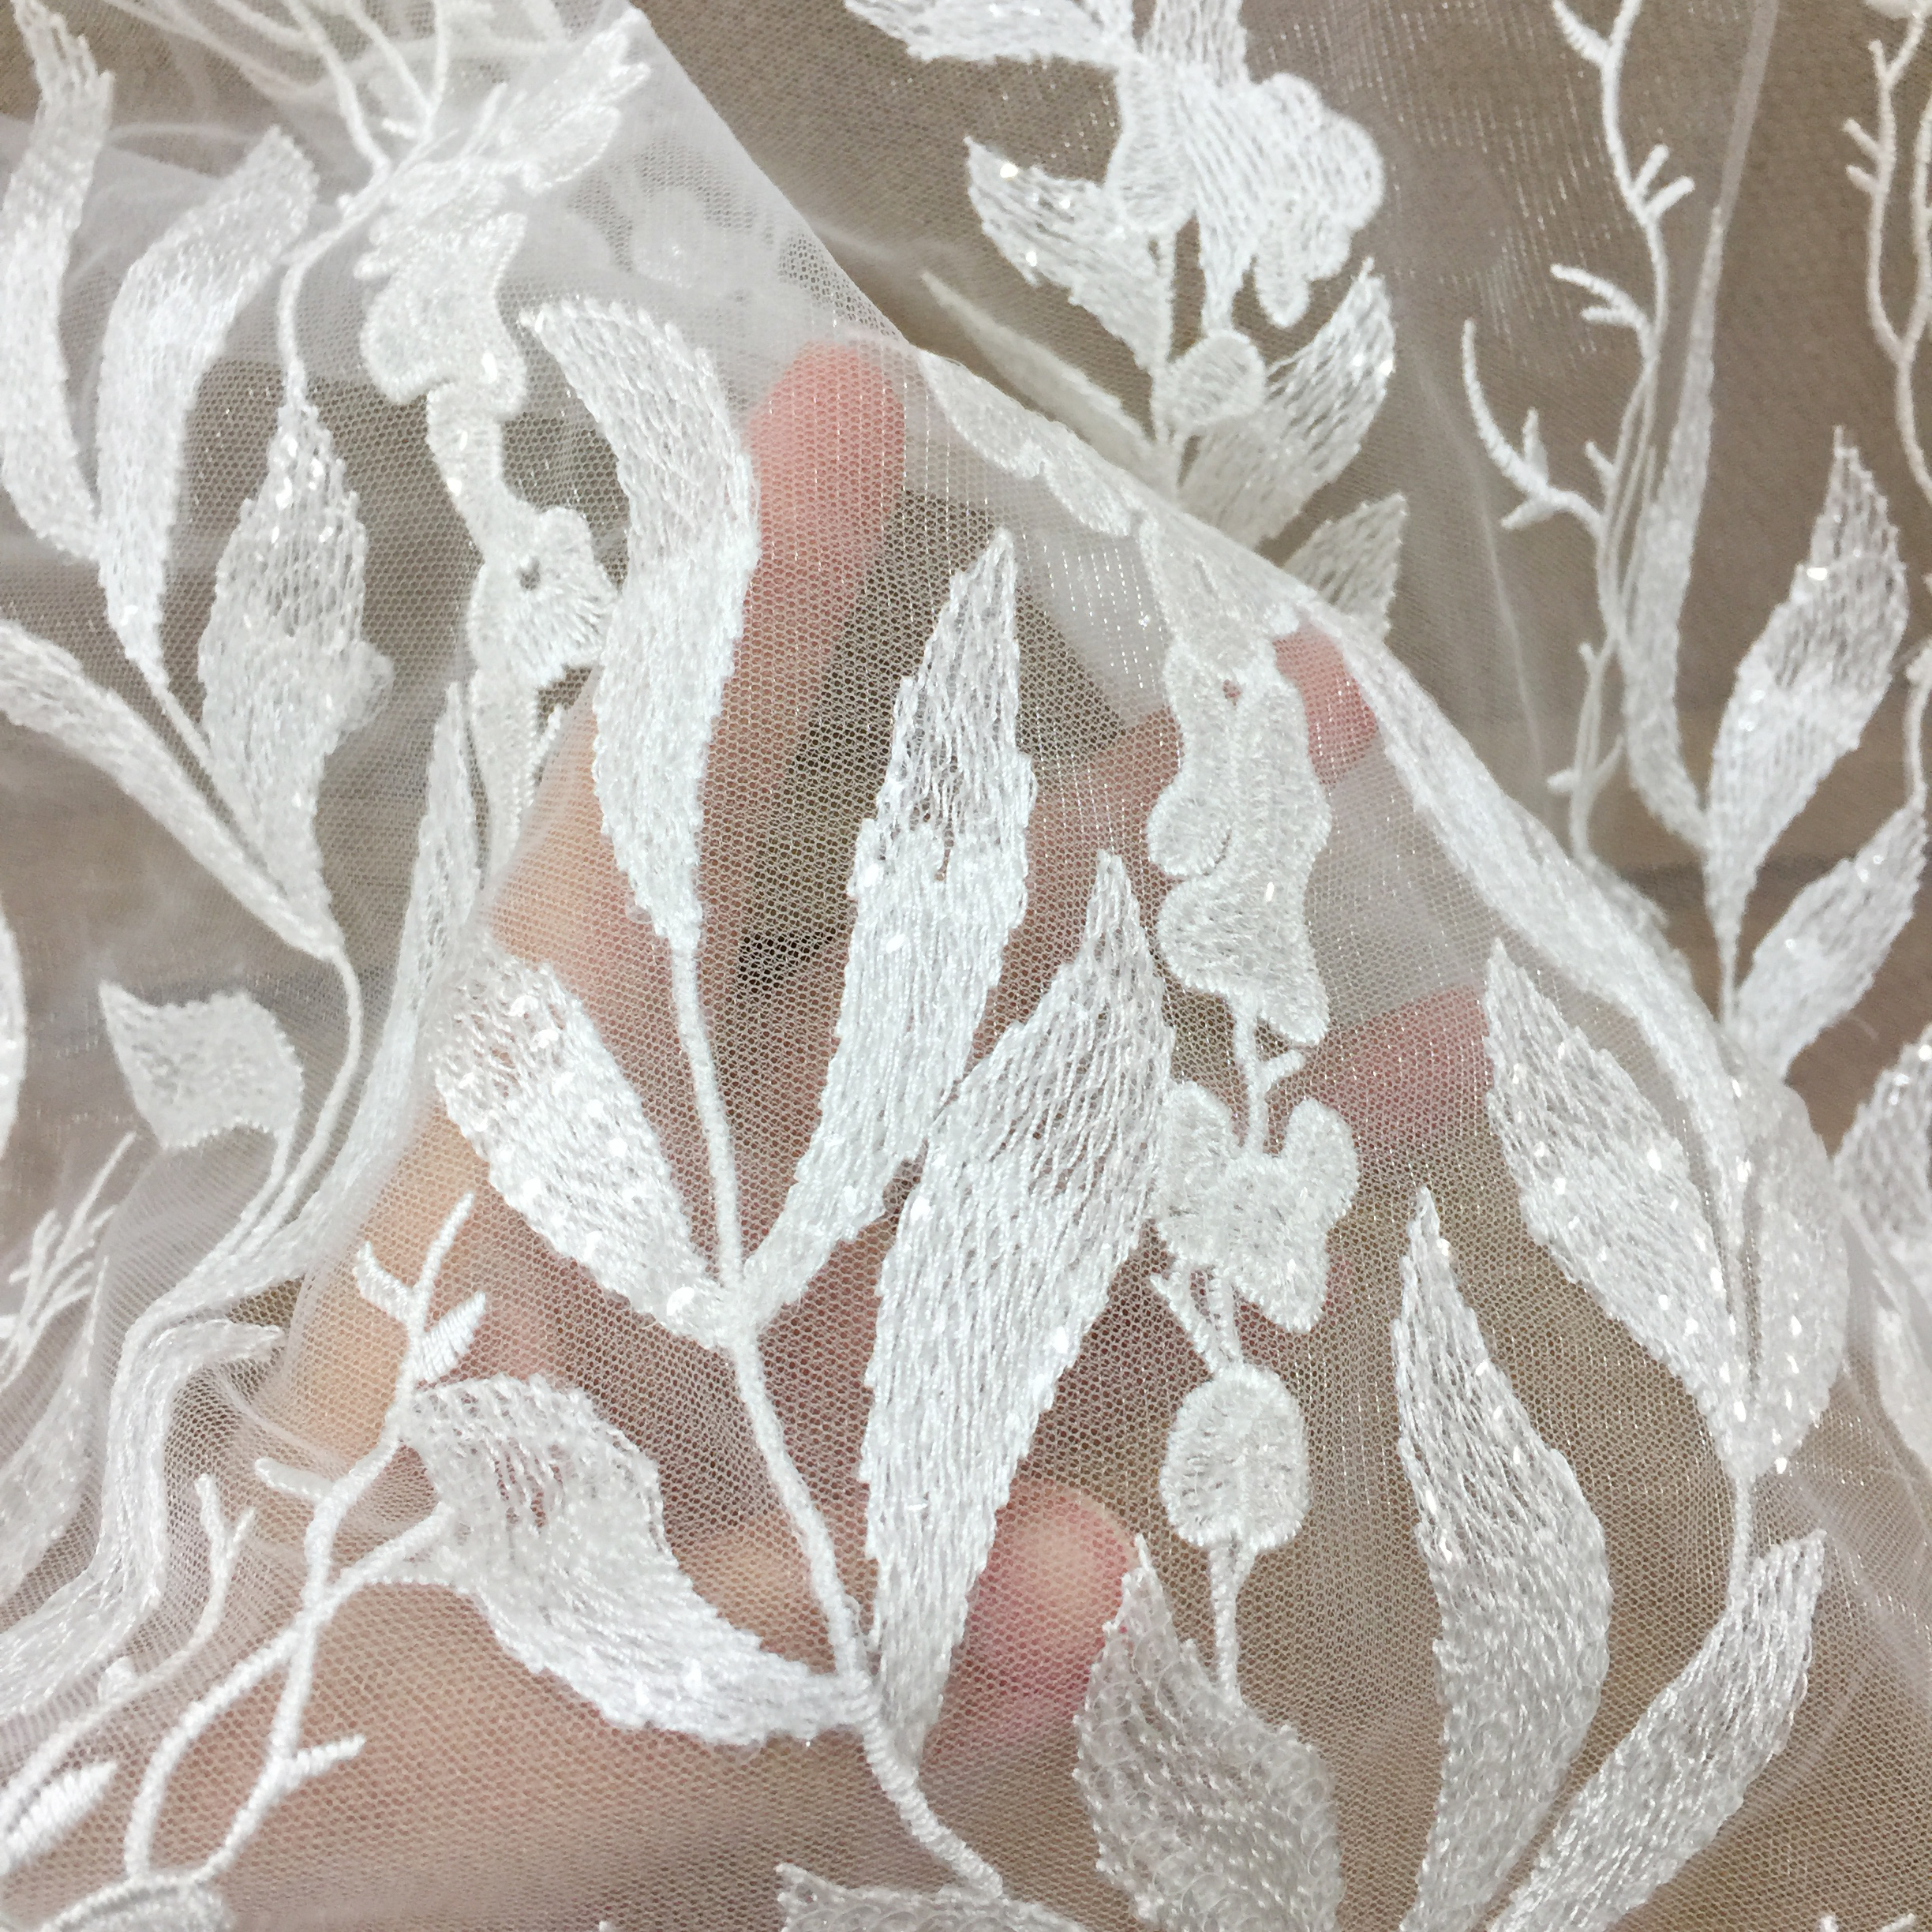 Clear sequin lace fabric by yard, lines stripes leaf sewing tulle DIY lace for wedding bridal gown lace dress 130cm wide